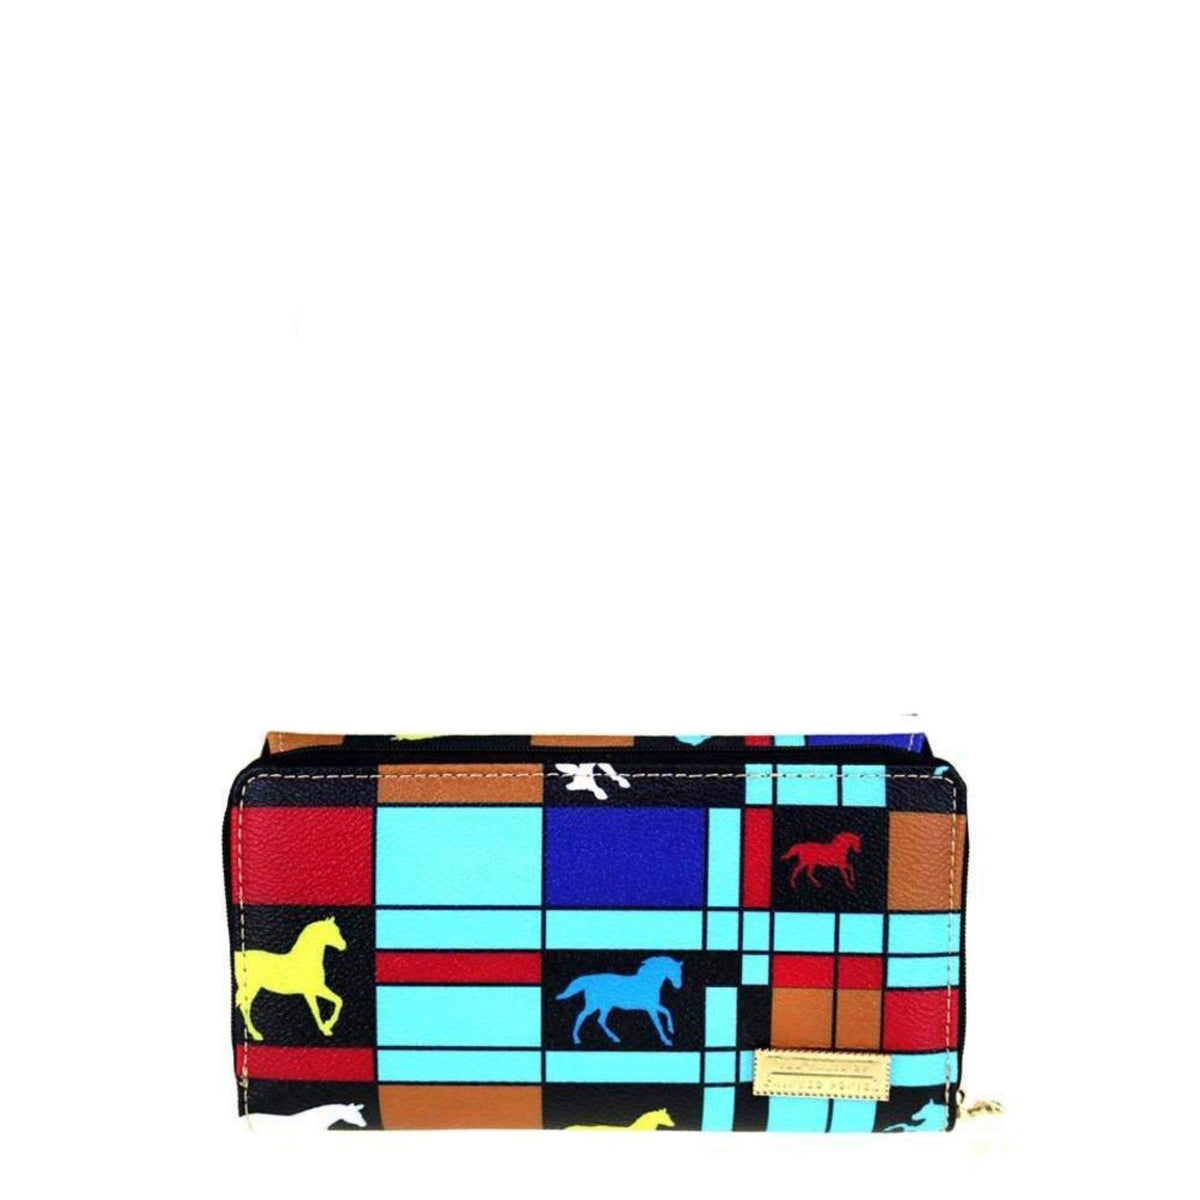 The Trail Of Painted Ponies Collection Secretary Style Wallet - Cowgirl Wear